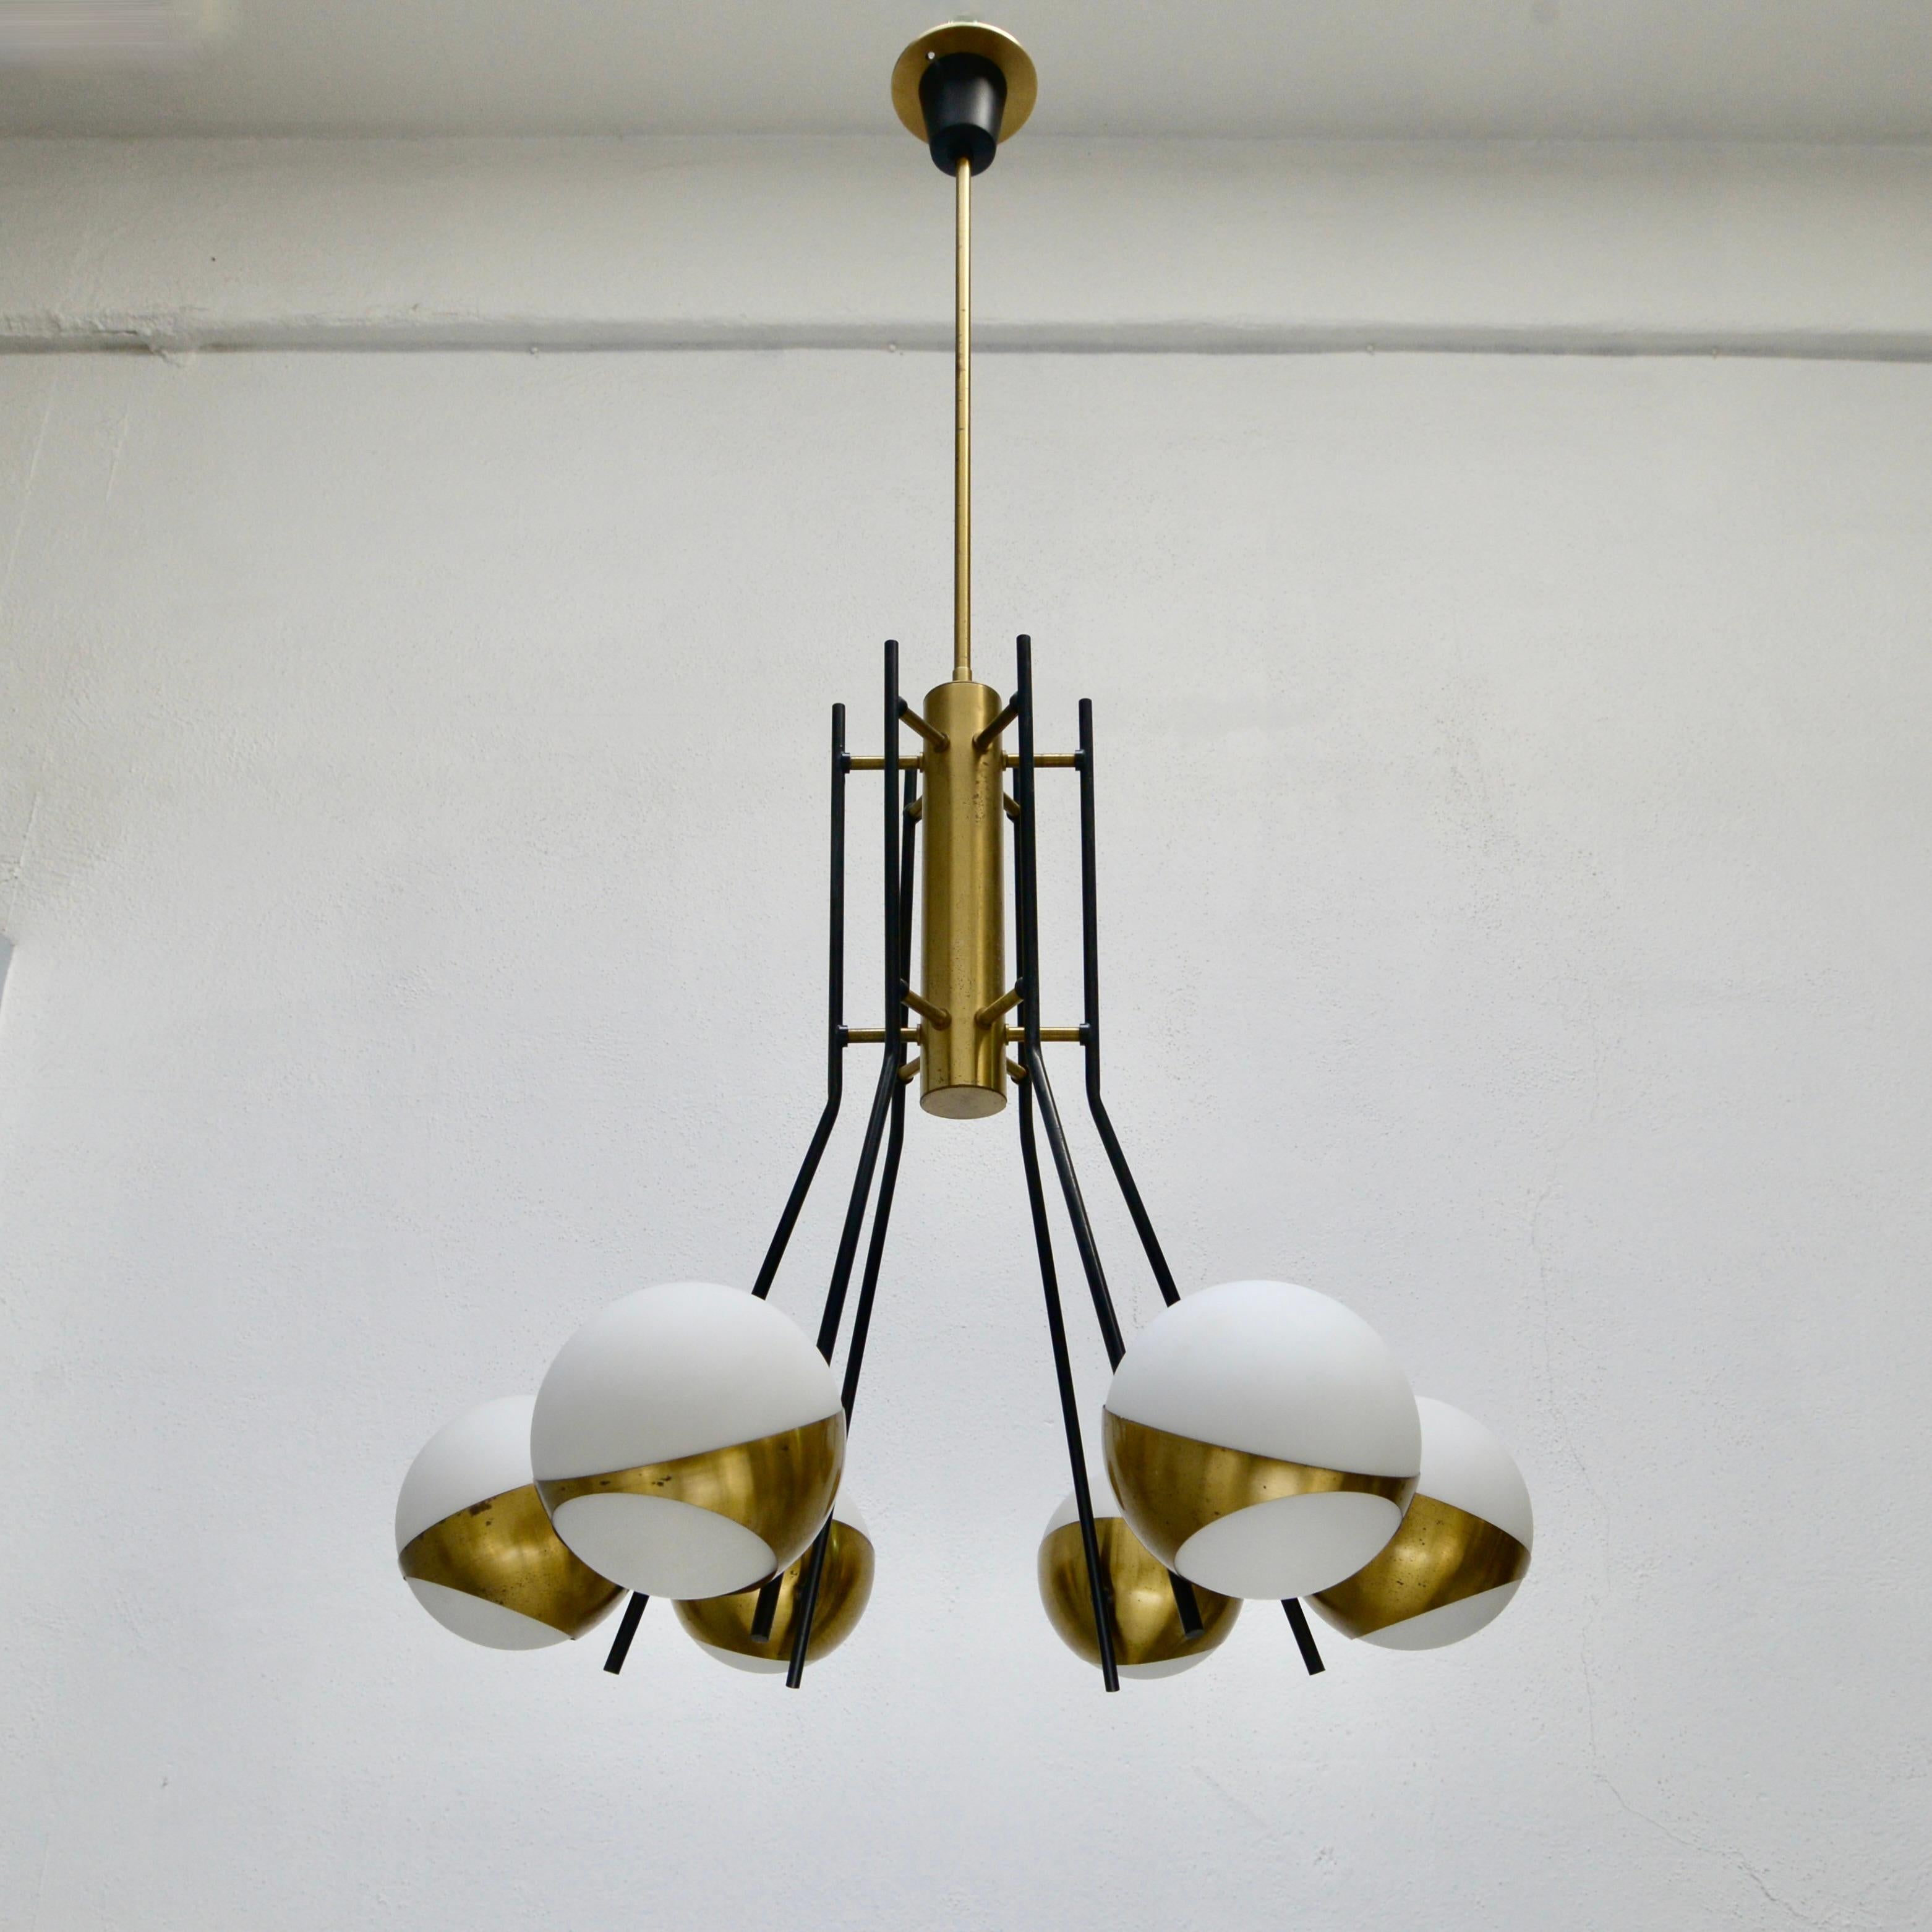 An original stunning 1950s 6 globe Stilnovo chandelier from Italy, with original brass and painted brass and glass finish. Partially restored and rewired with 6 E12 candelabra based sockets for use in the US. Light bulbs included with order. Can be